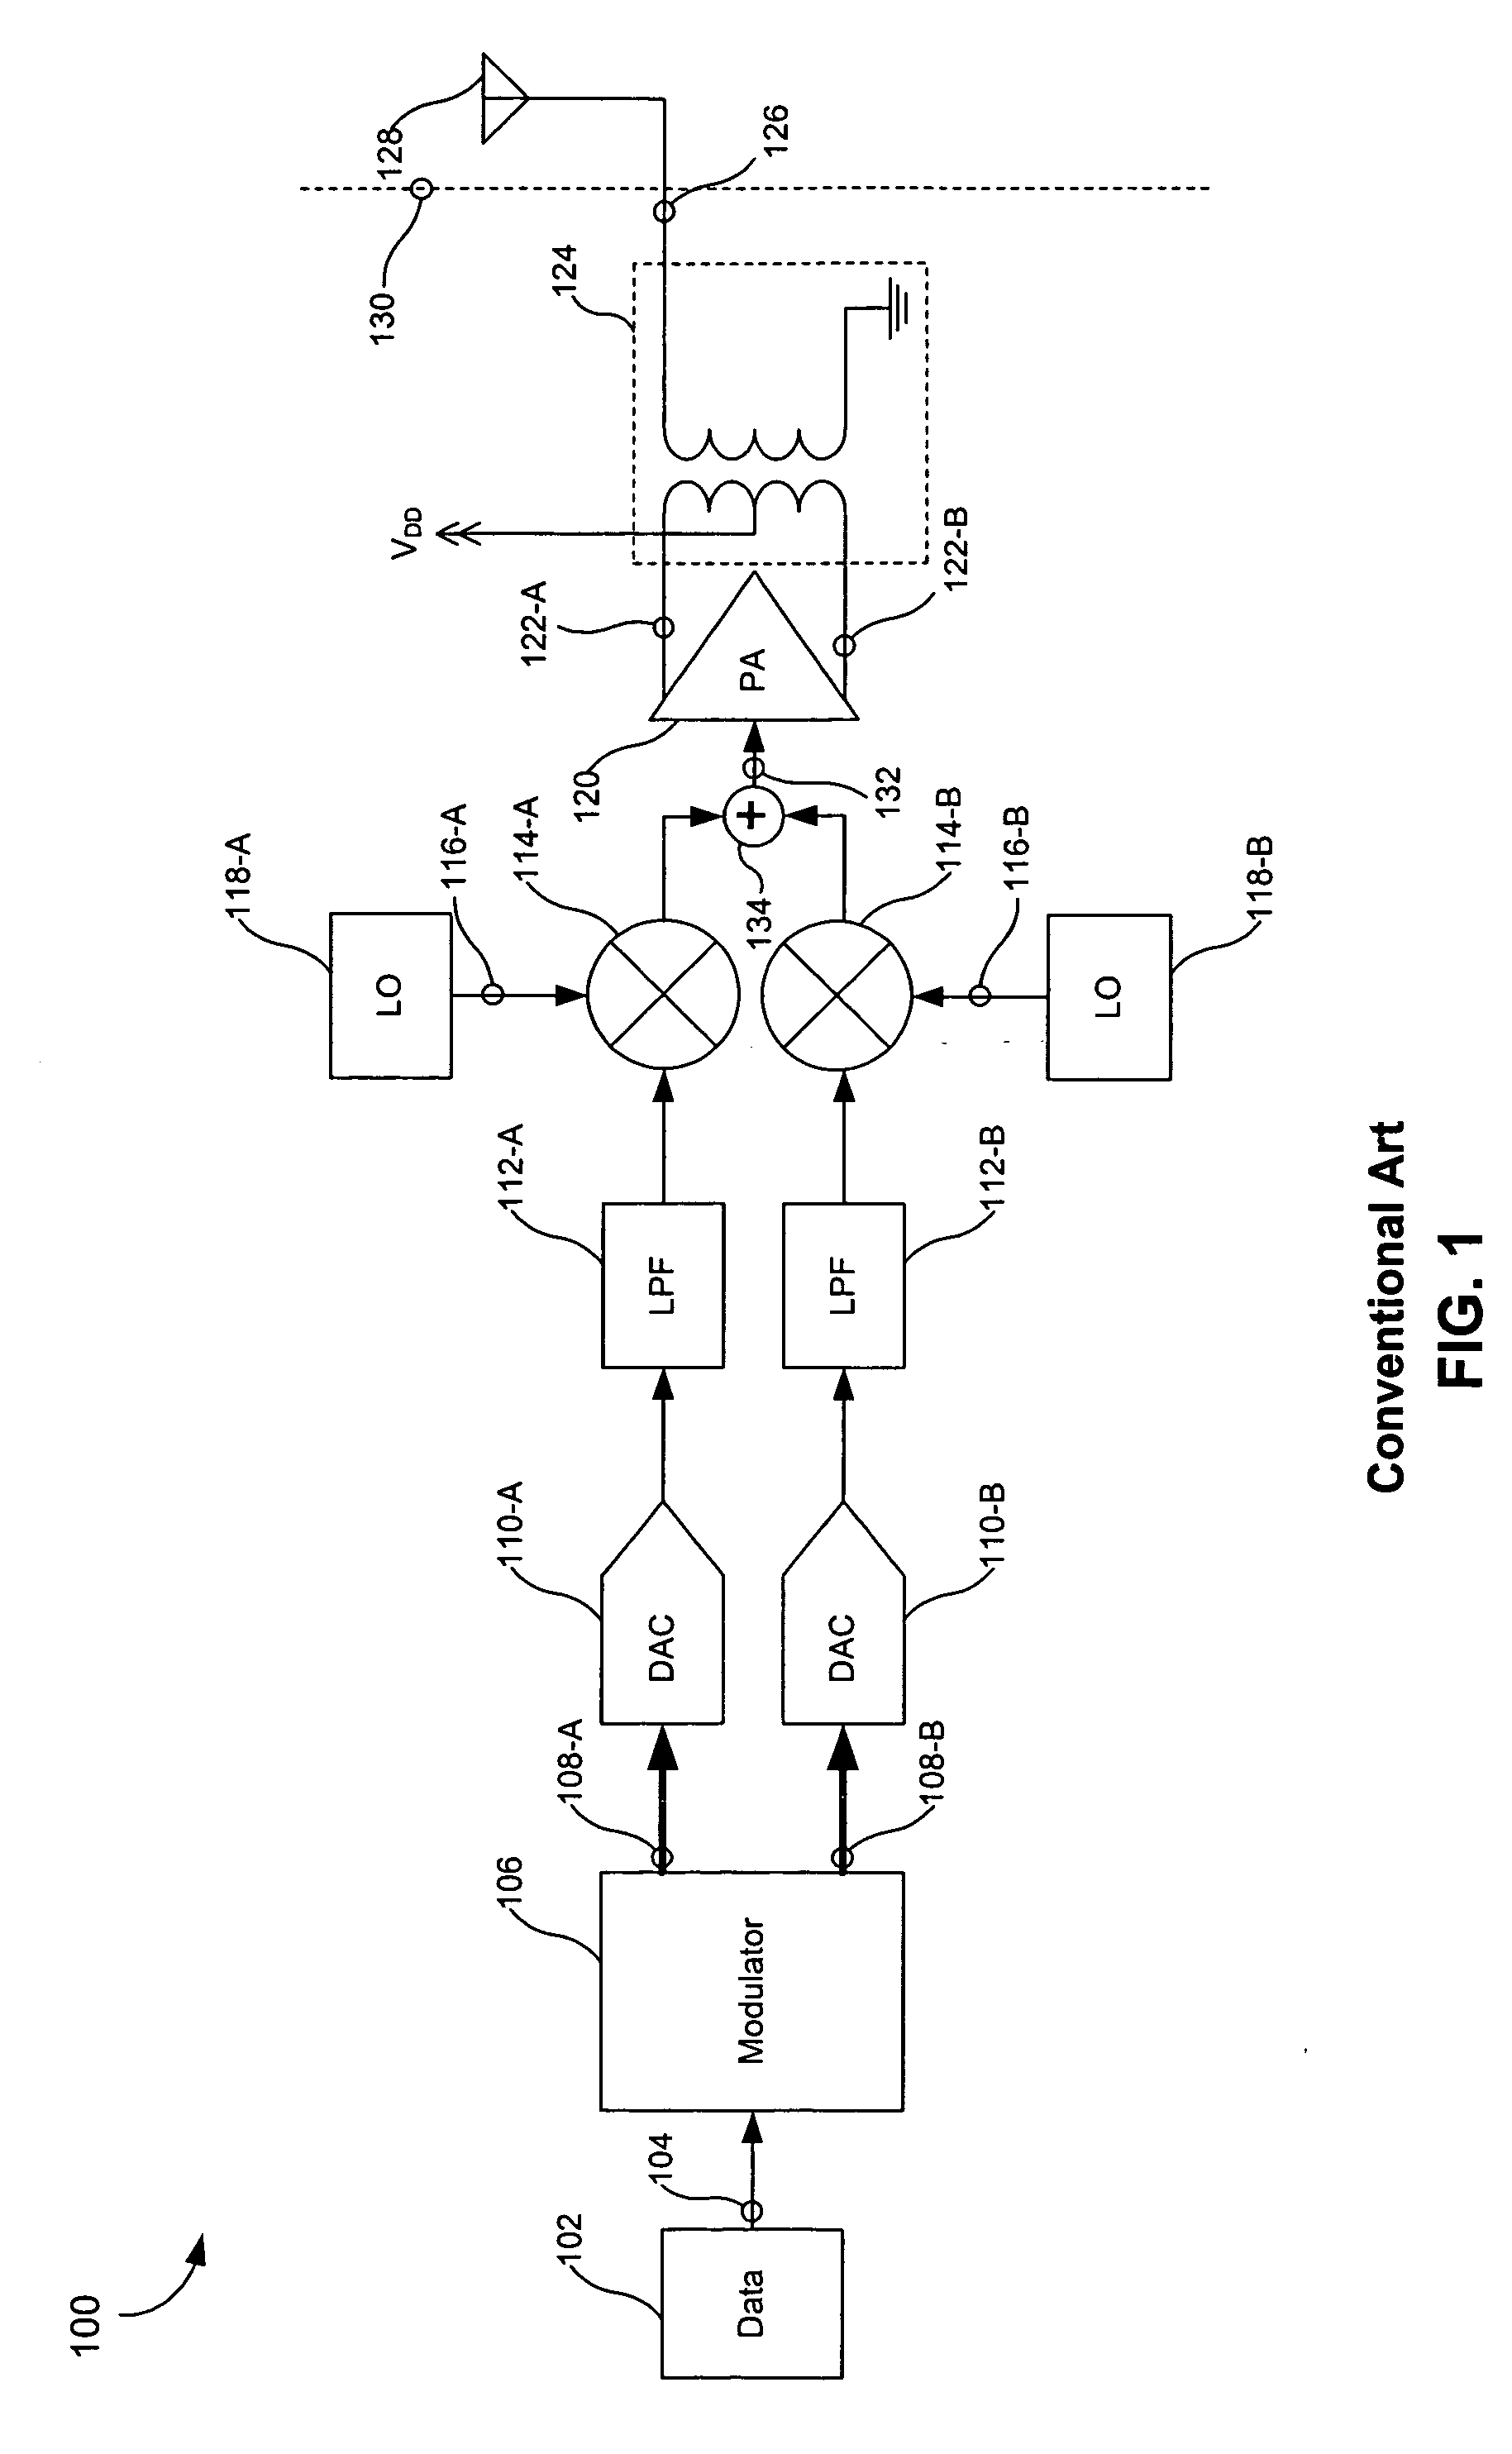 Linear and non-linear dual mode transmitter